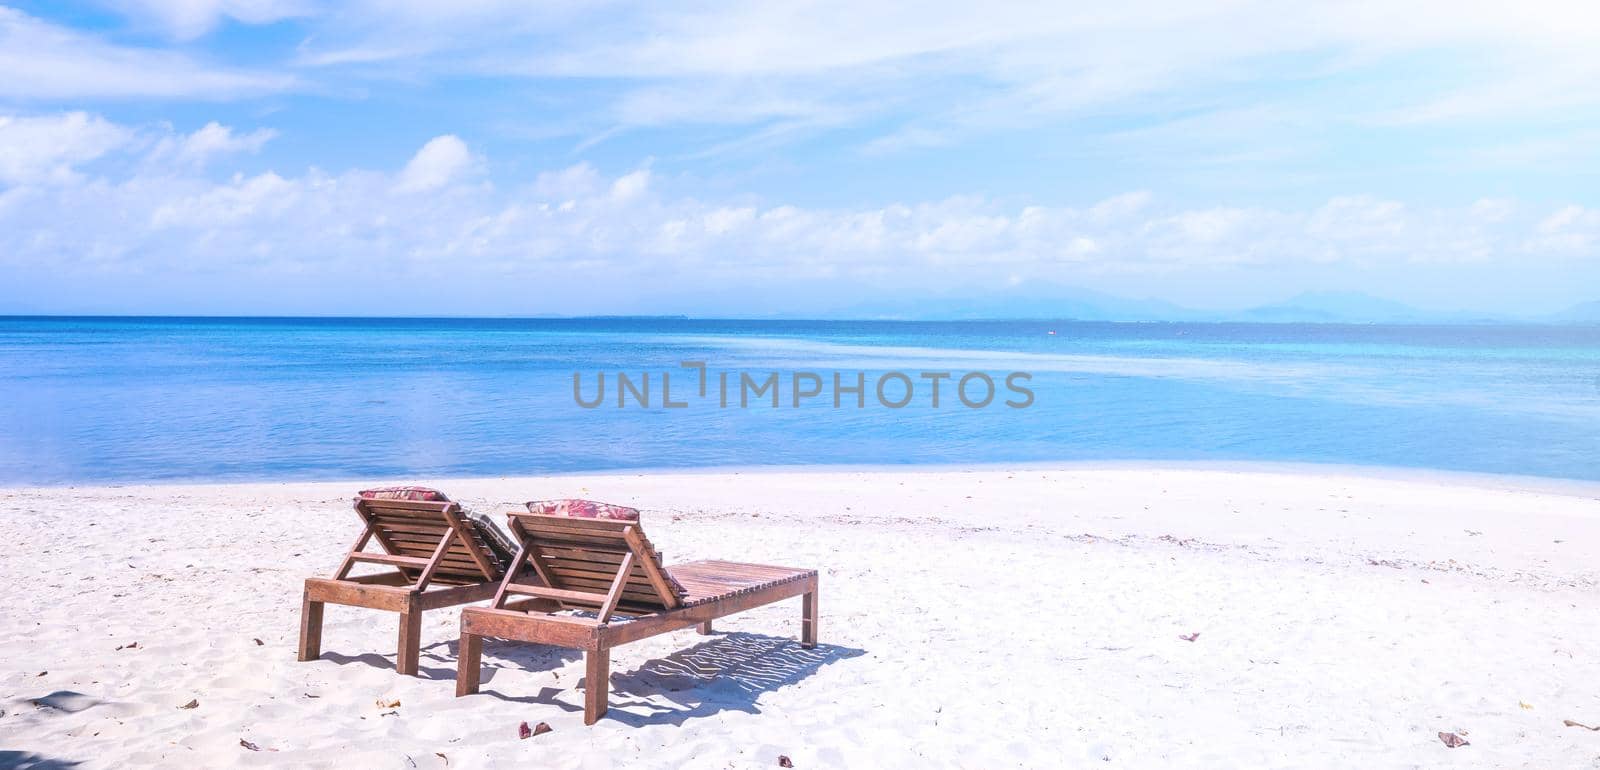 Chairs on the amazing beautiful sandy beach near the ocean with blue sky. Concept of summer leisure calm vacation for a tourism idea. Empty copy space, inspiration of tropical landscape by ROMIXIMAGE